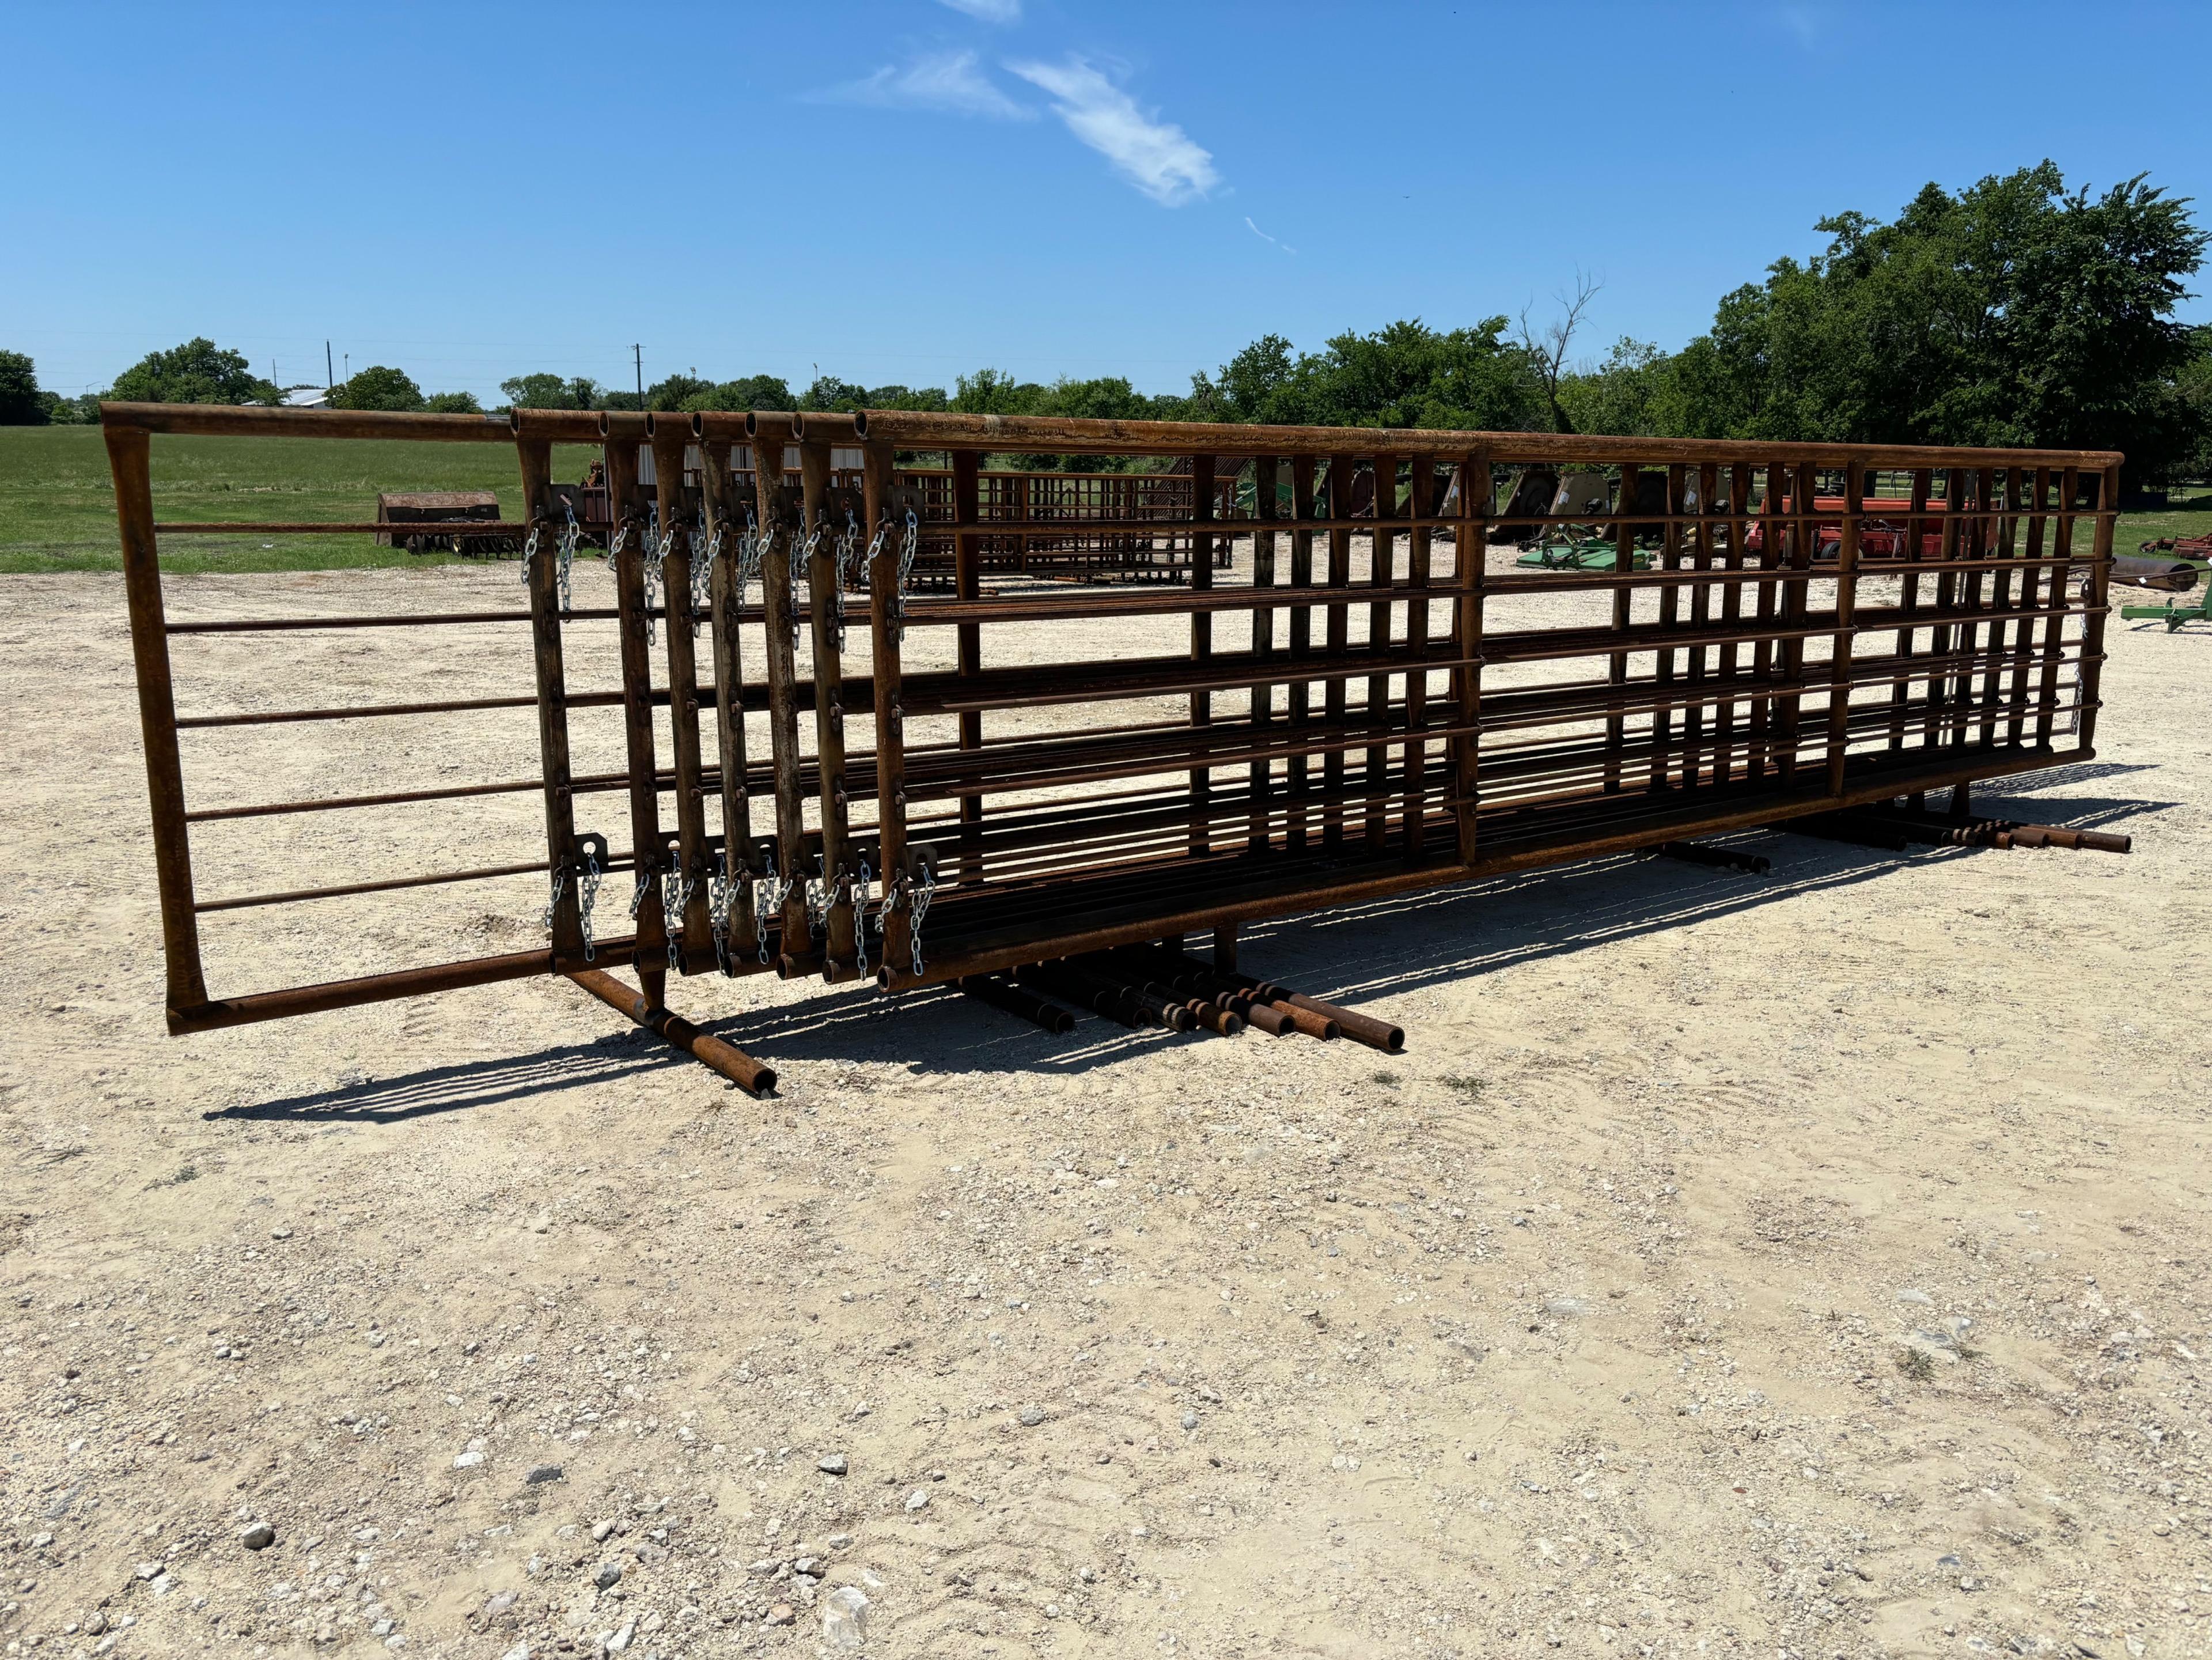 8 - 2 7/8" Pipe Panels w/ 10' Gate Attached to end of one Panel